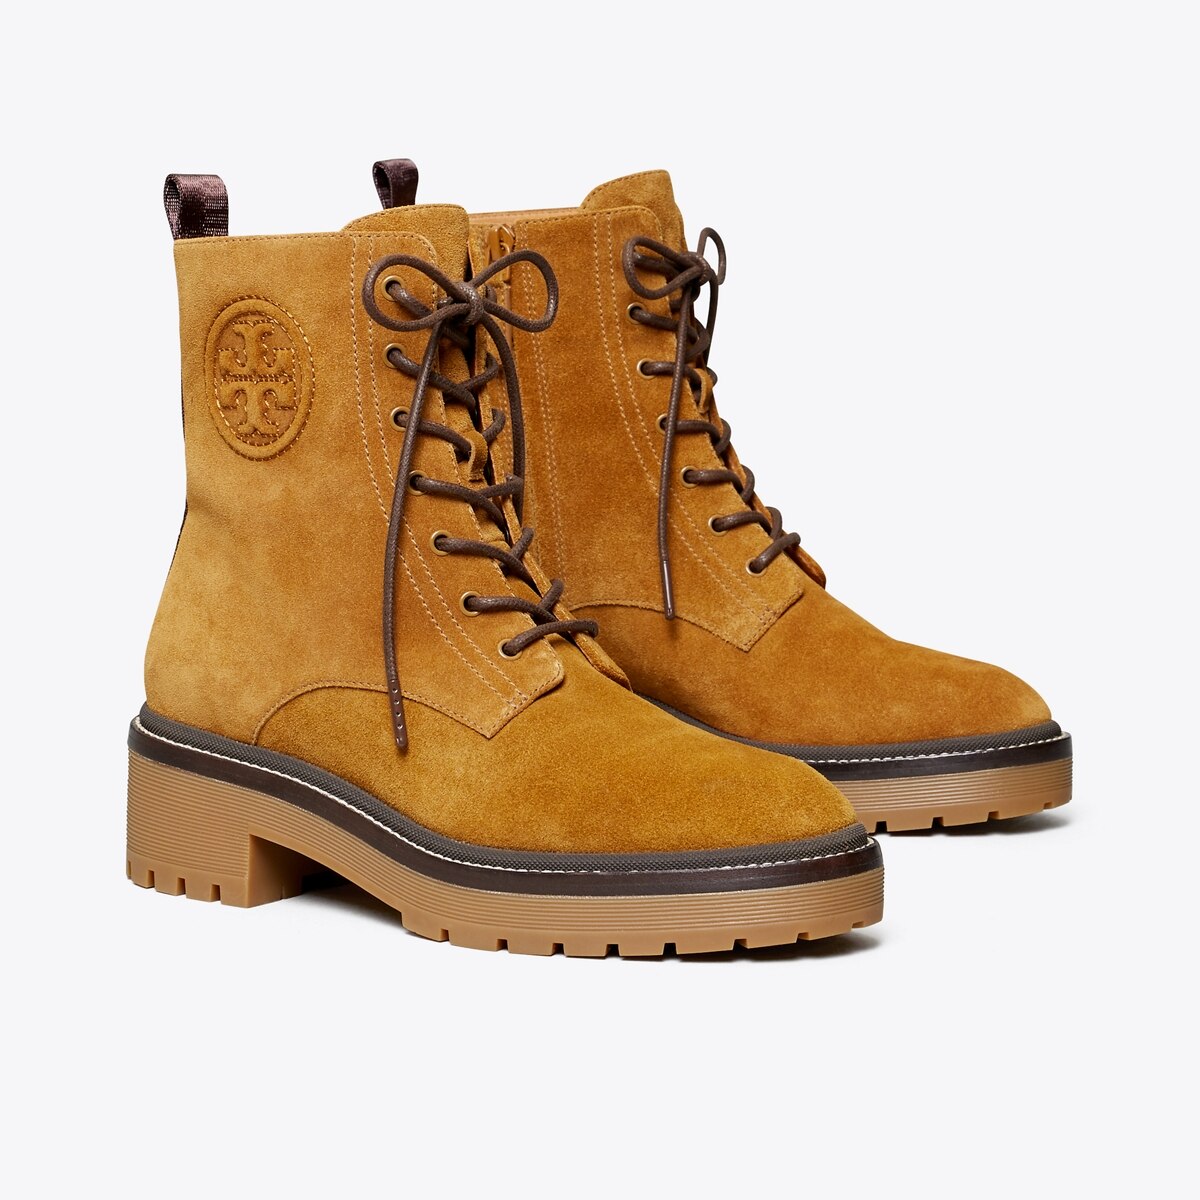 Miller Suede Lug-Sole Boot: Women's Designer Ankle Boots | Tory Burch